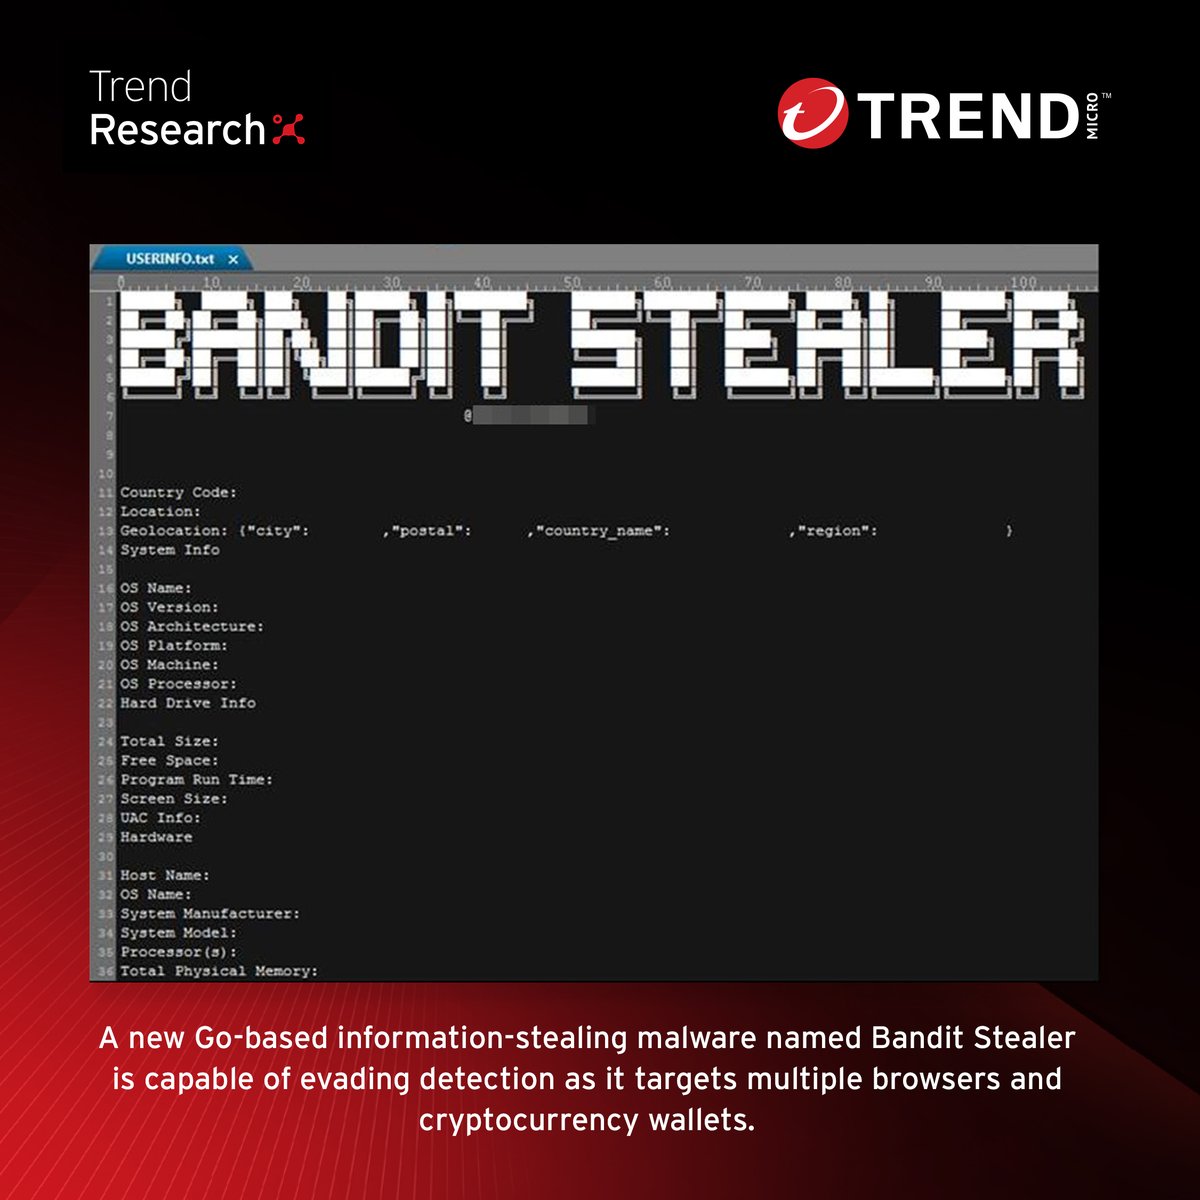 A new info stealer named Bandit Stealer can evade detection and analysis and employs Linux-specific
commands to terminate blacklisted processes. 

Find out how this Go-based info stealer will likely be targeting more systems in the future: research.trendmicro.com/3OCFBRH